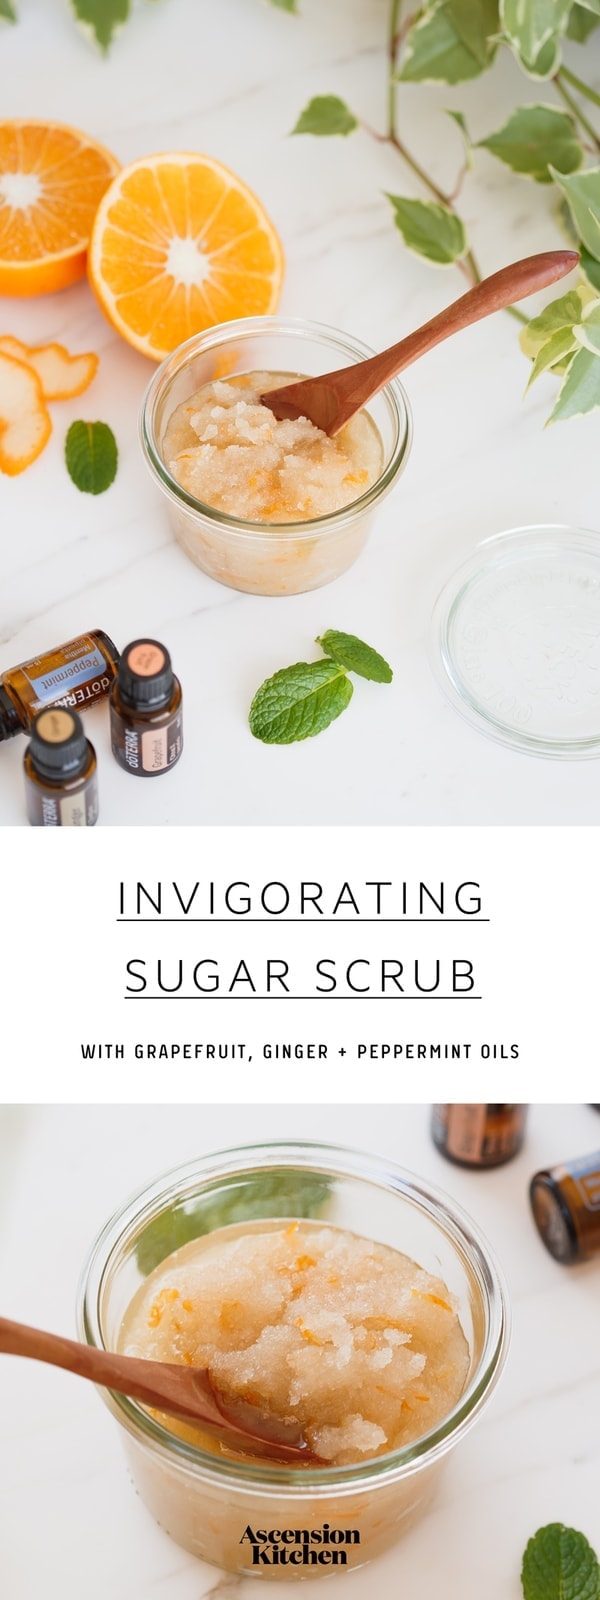 An invigorating homemade sugar scrub infused with grapefruit, ginger and peppermint essential oils. #sugarscrub #diybeautyrecipes #sugarscrubessentialoils #essentialoilrecipes #doterra #cellulite #beautyrecipes #skincare #diybeauty #natural #AscensionKitchen // Pin to your own inspiration board! //